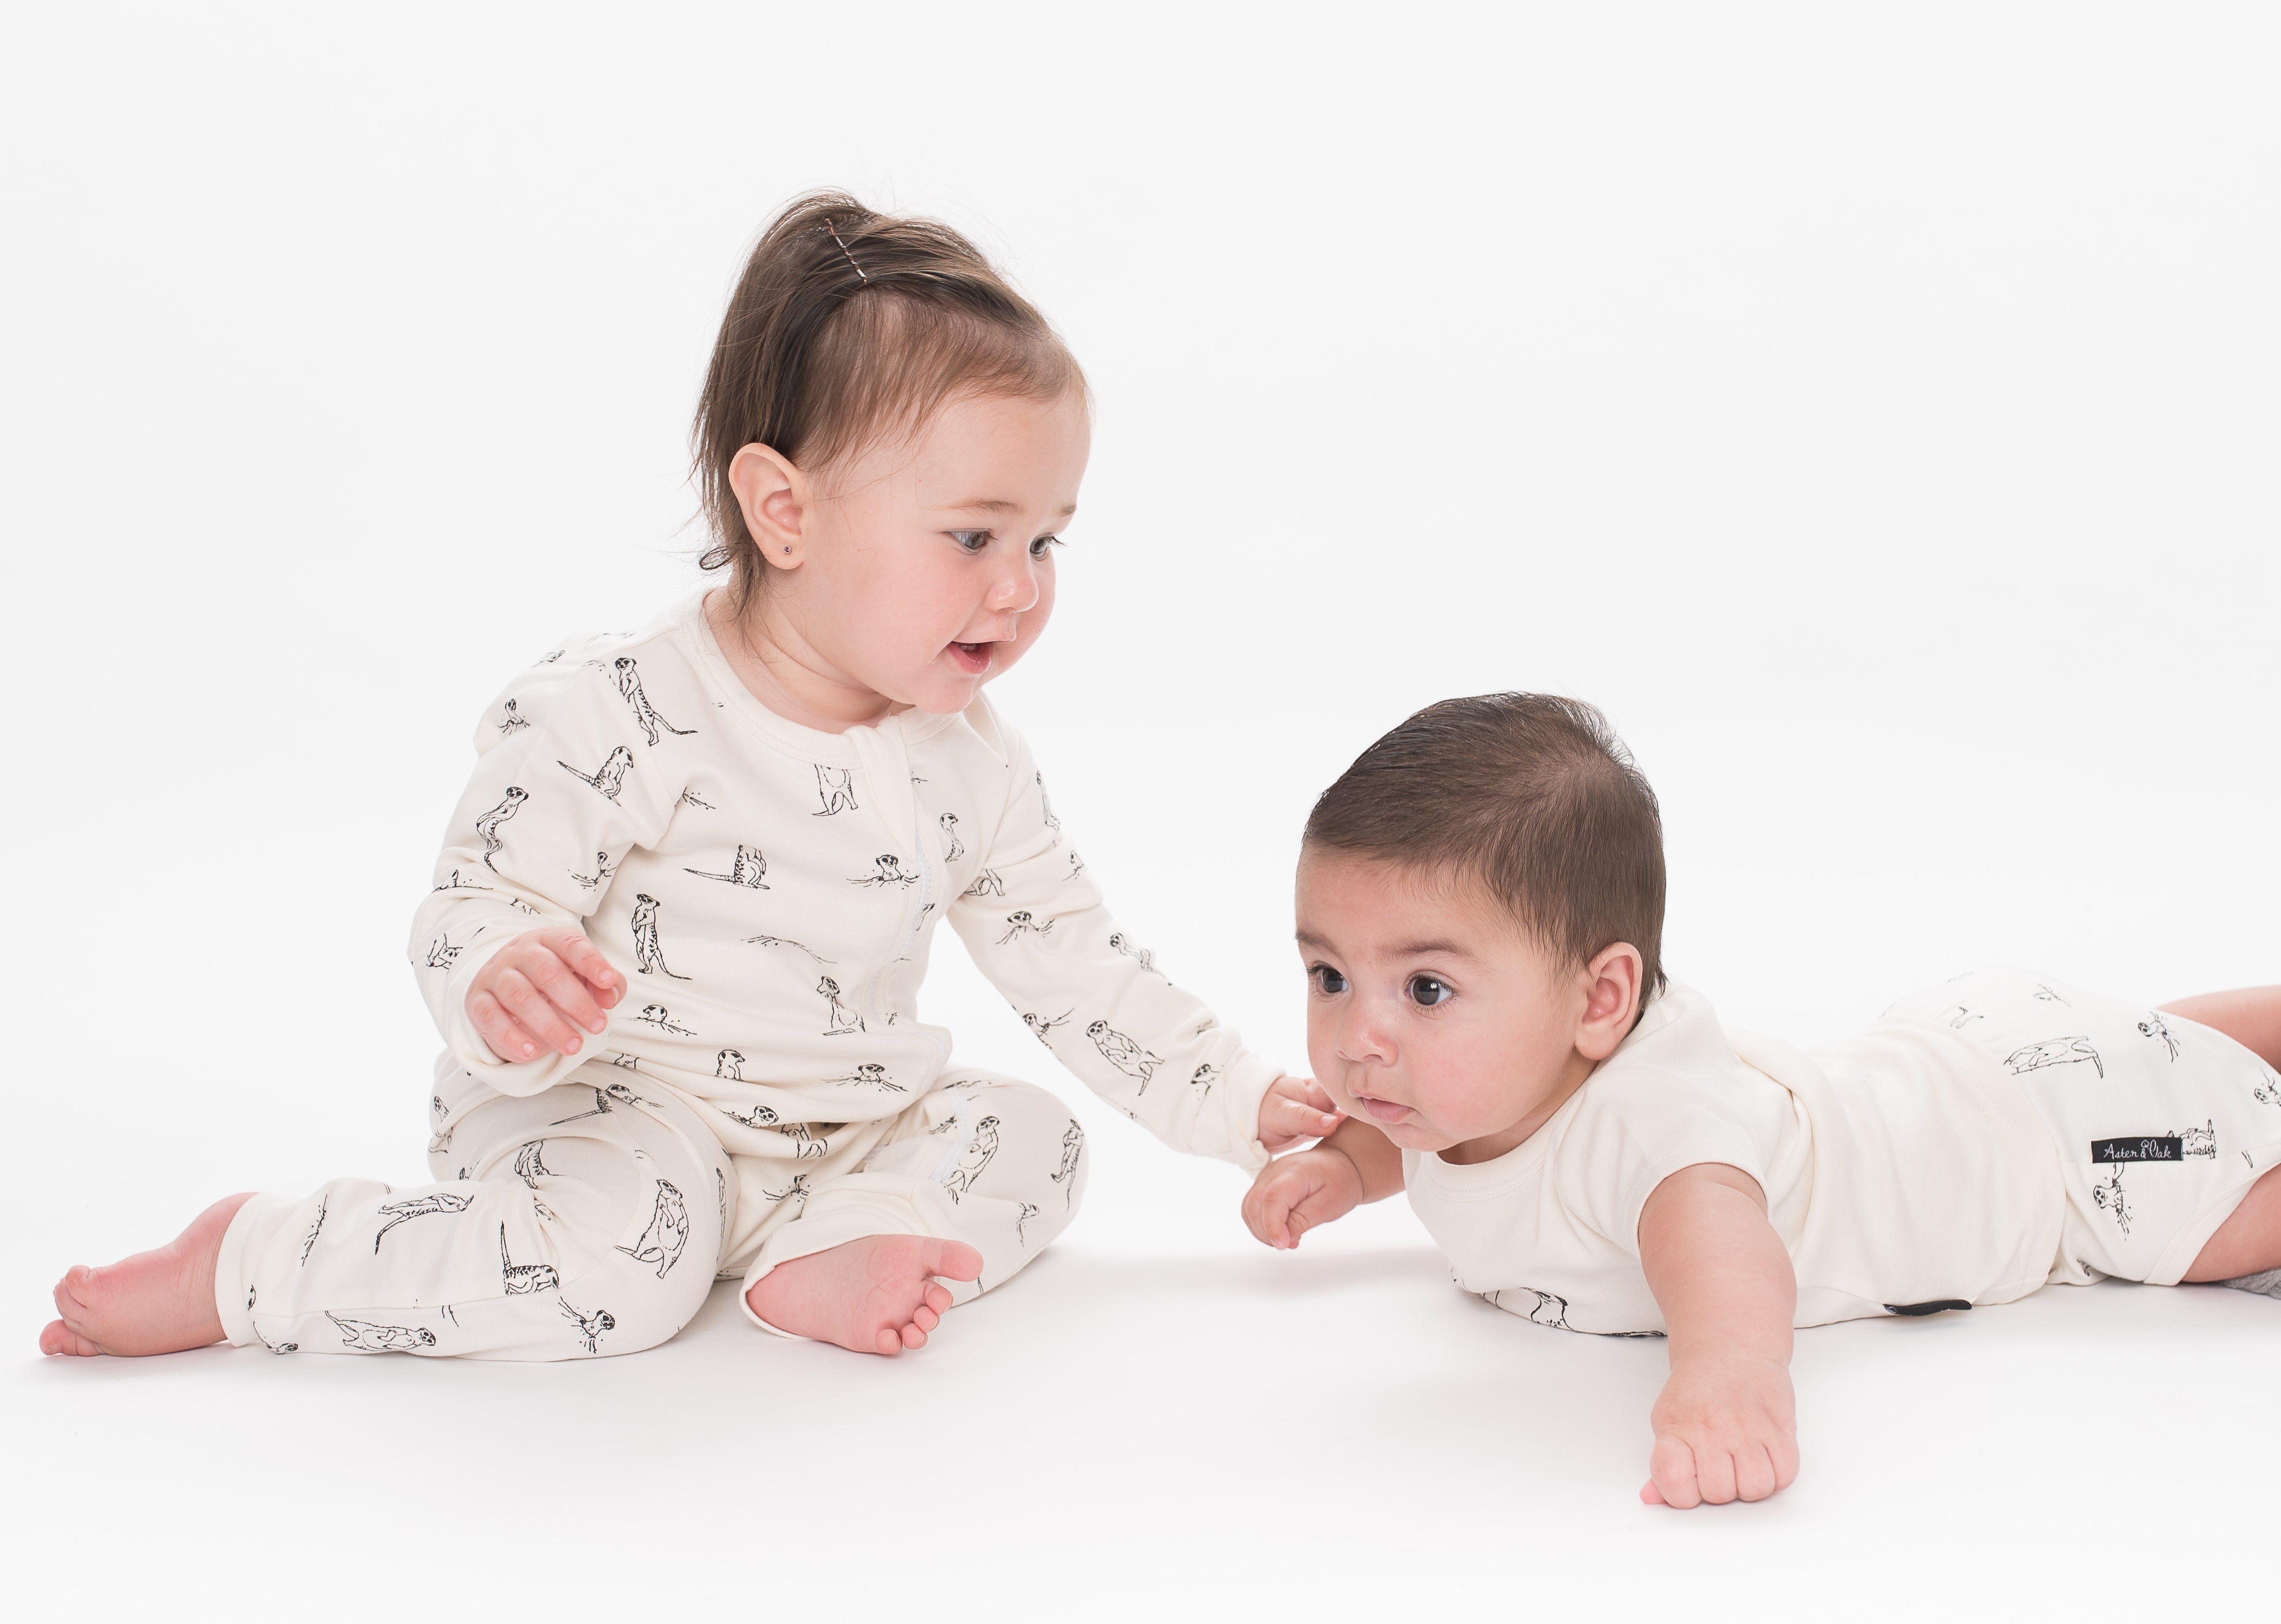 Best Fabrics for Baby Clothes - and the Worst!